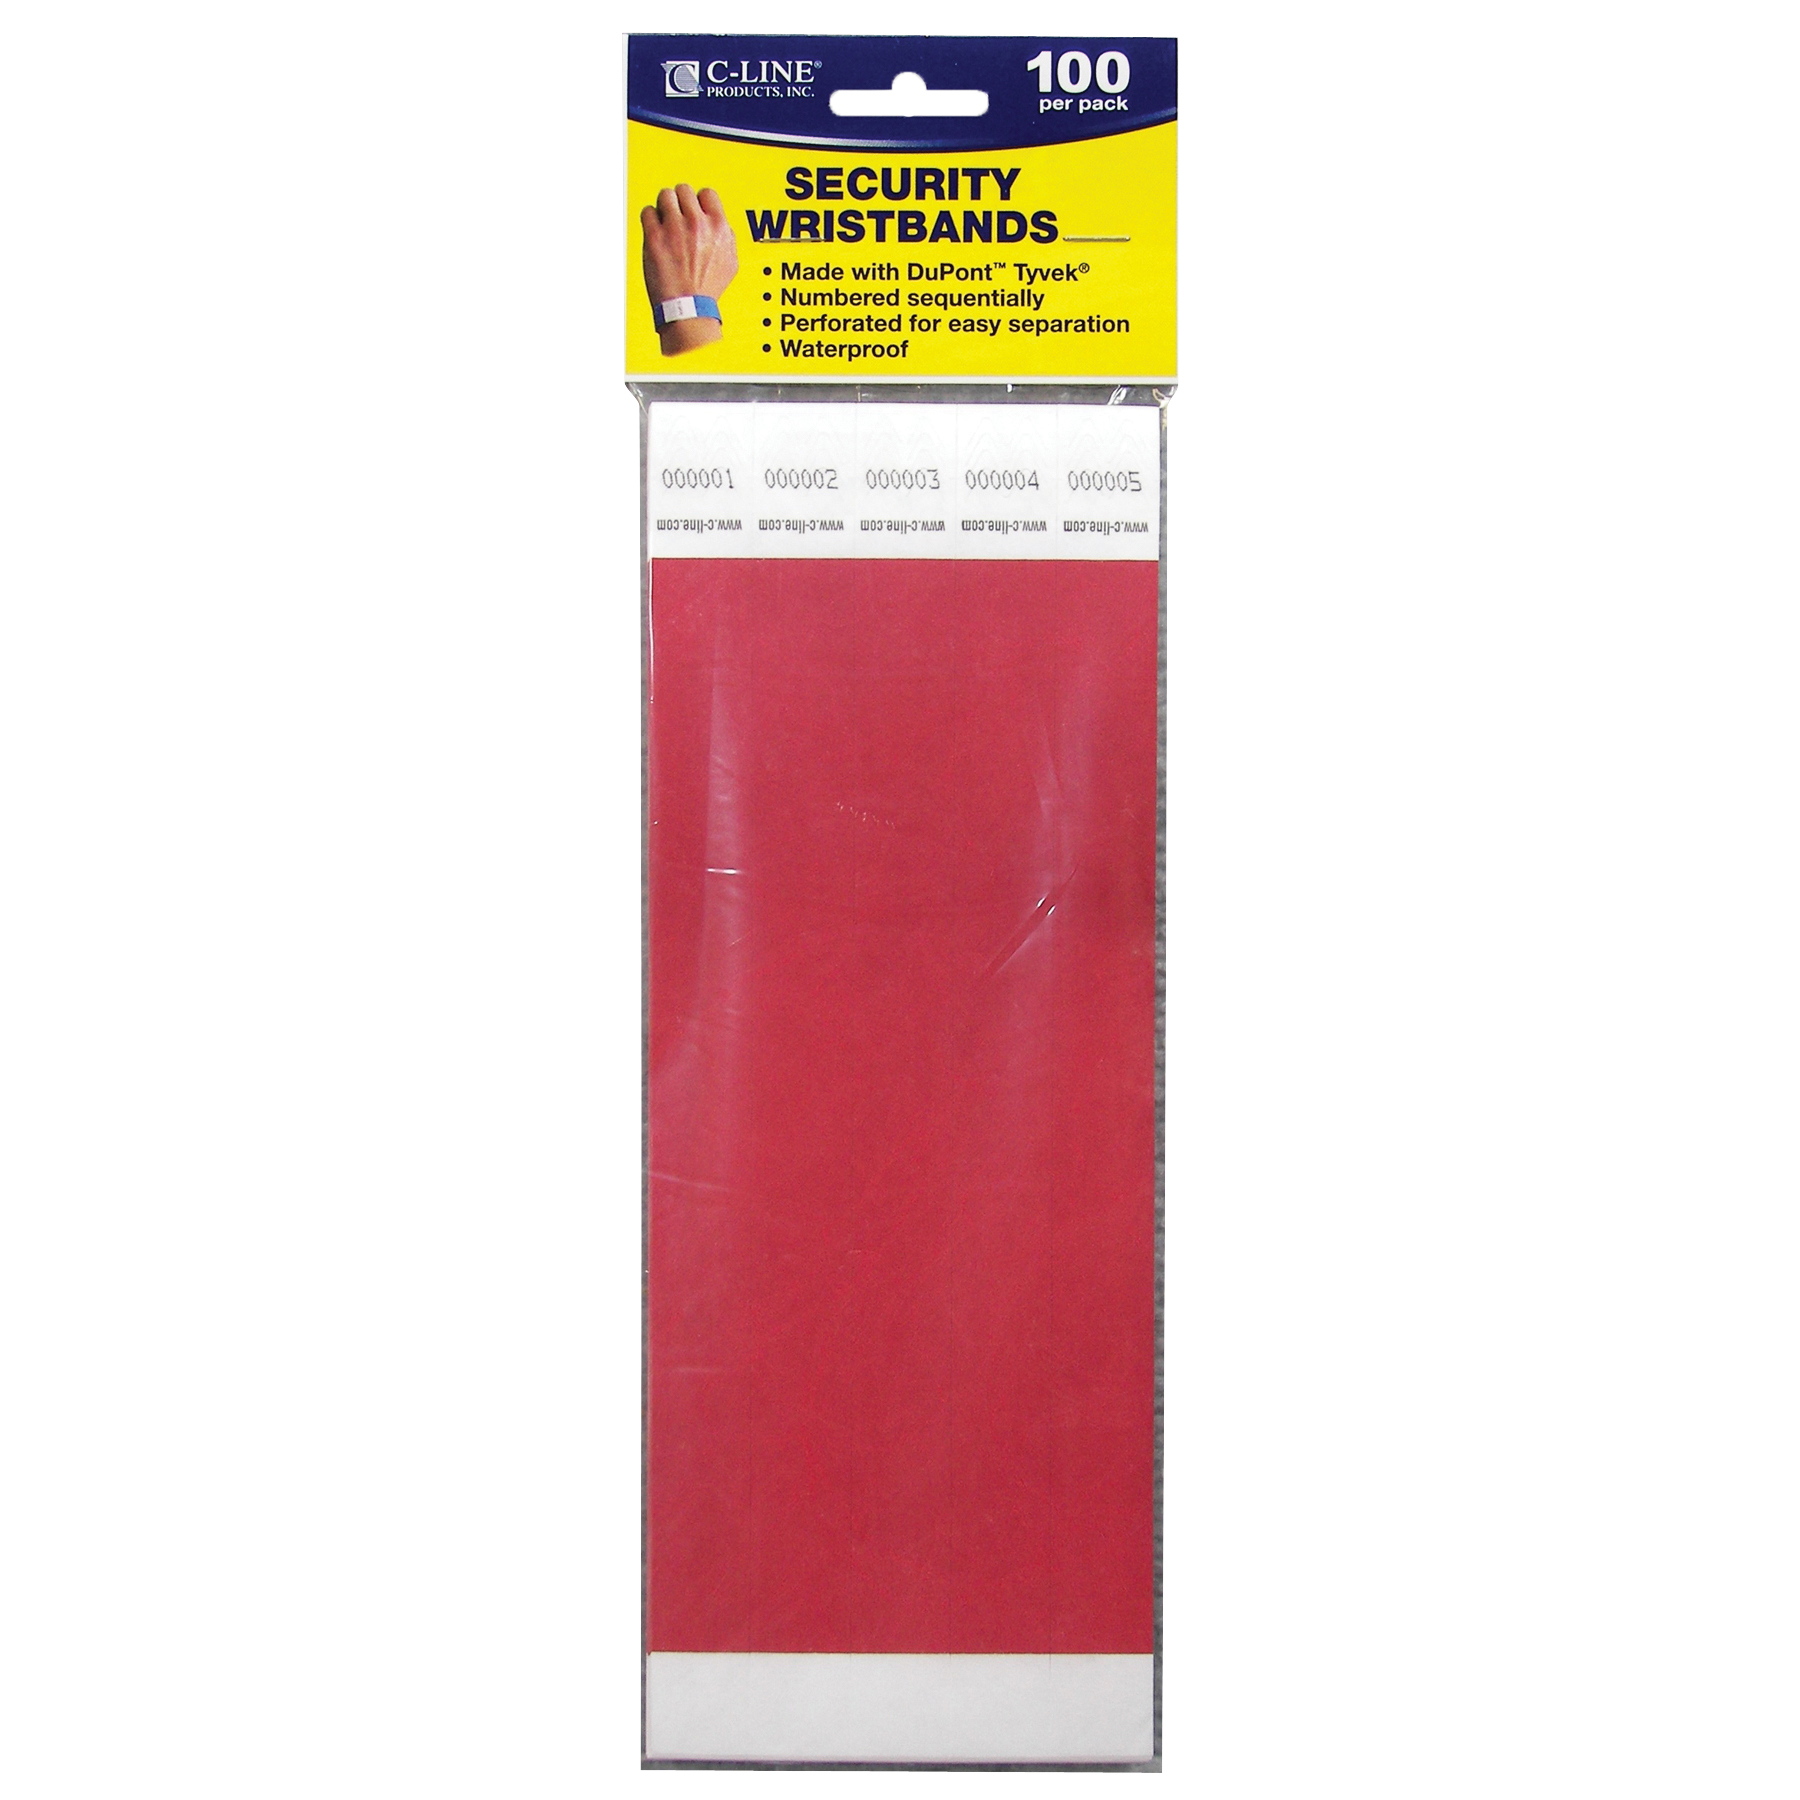 DuPont Tyvek Security Wristbands, Red, 100/Pack